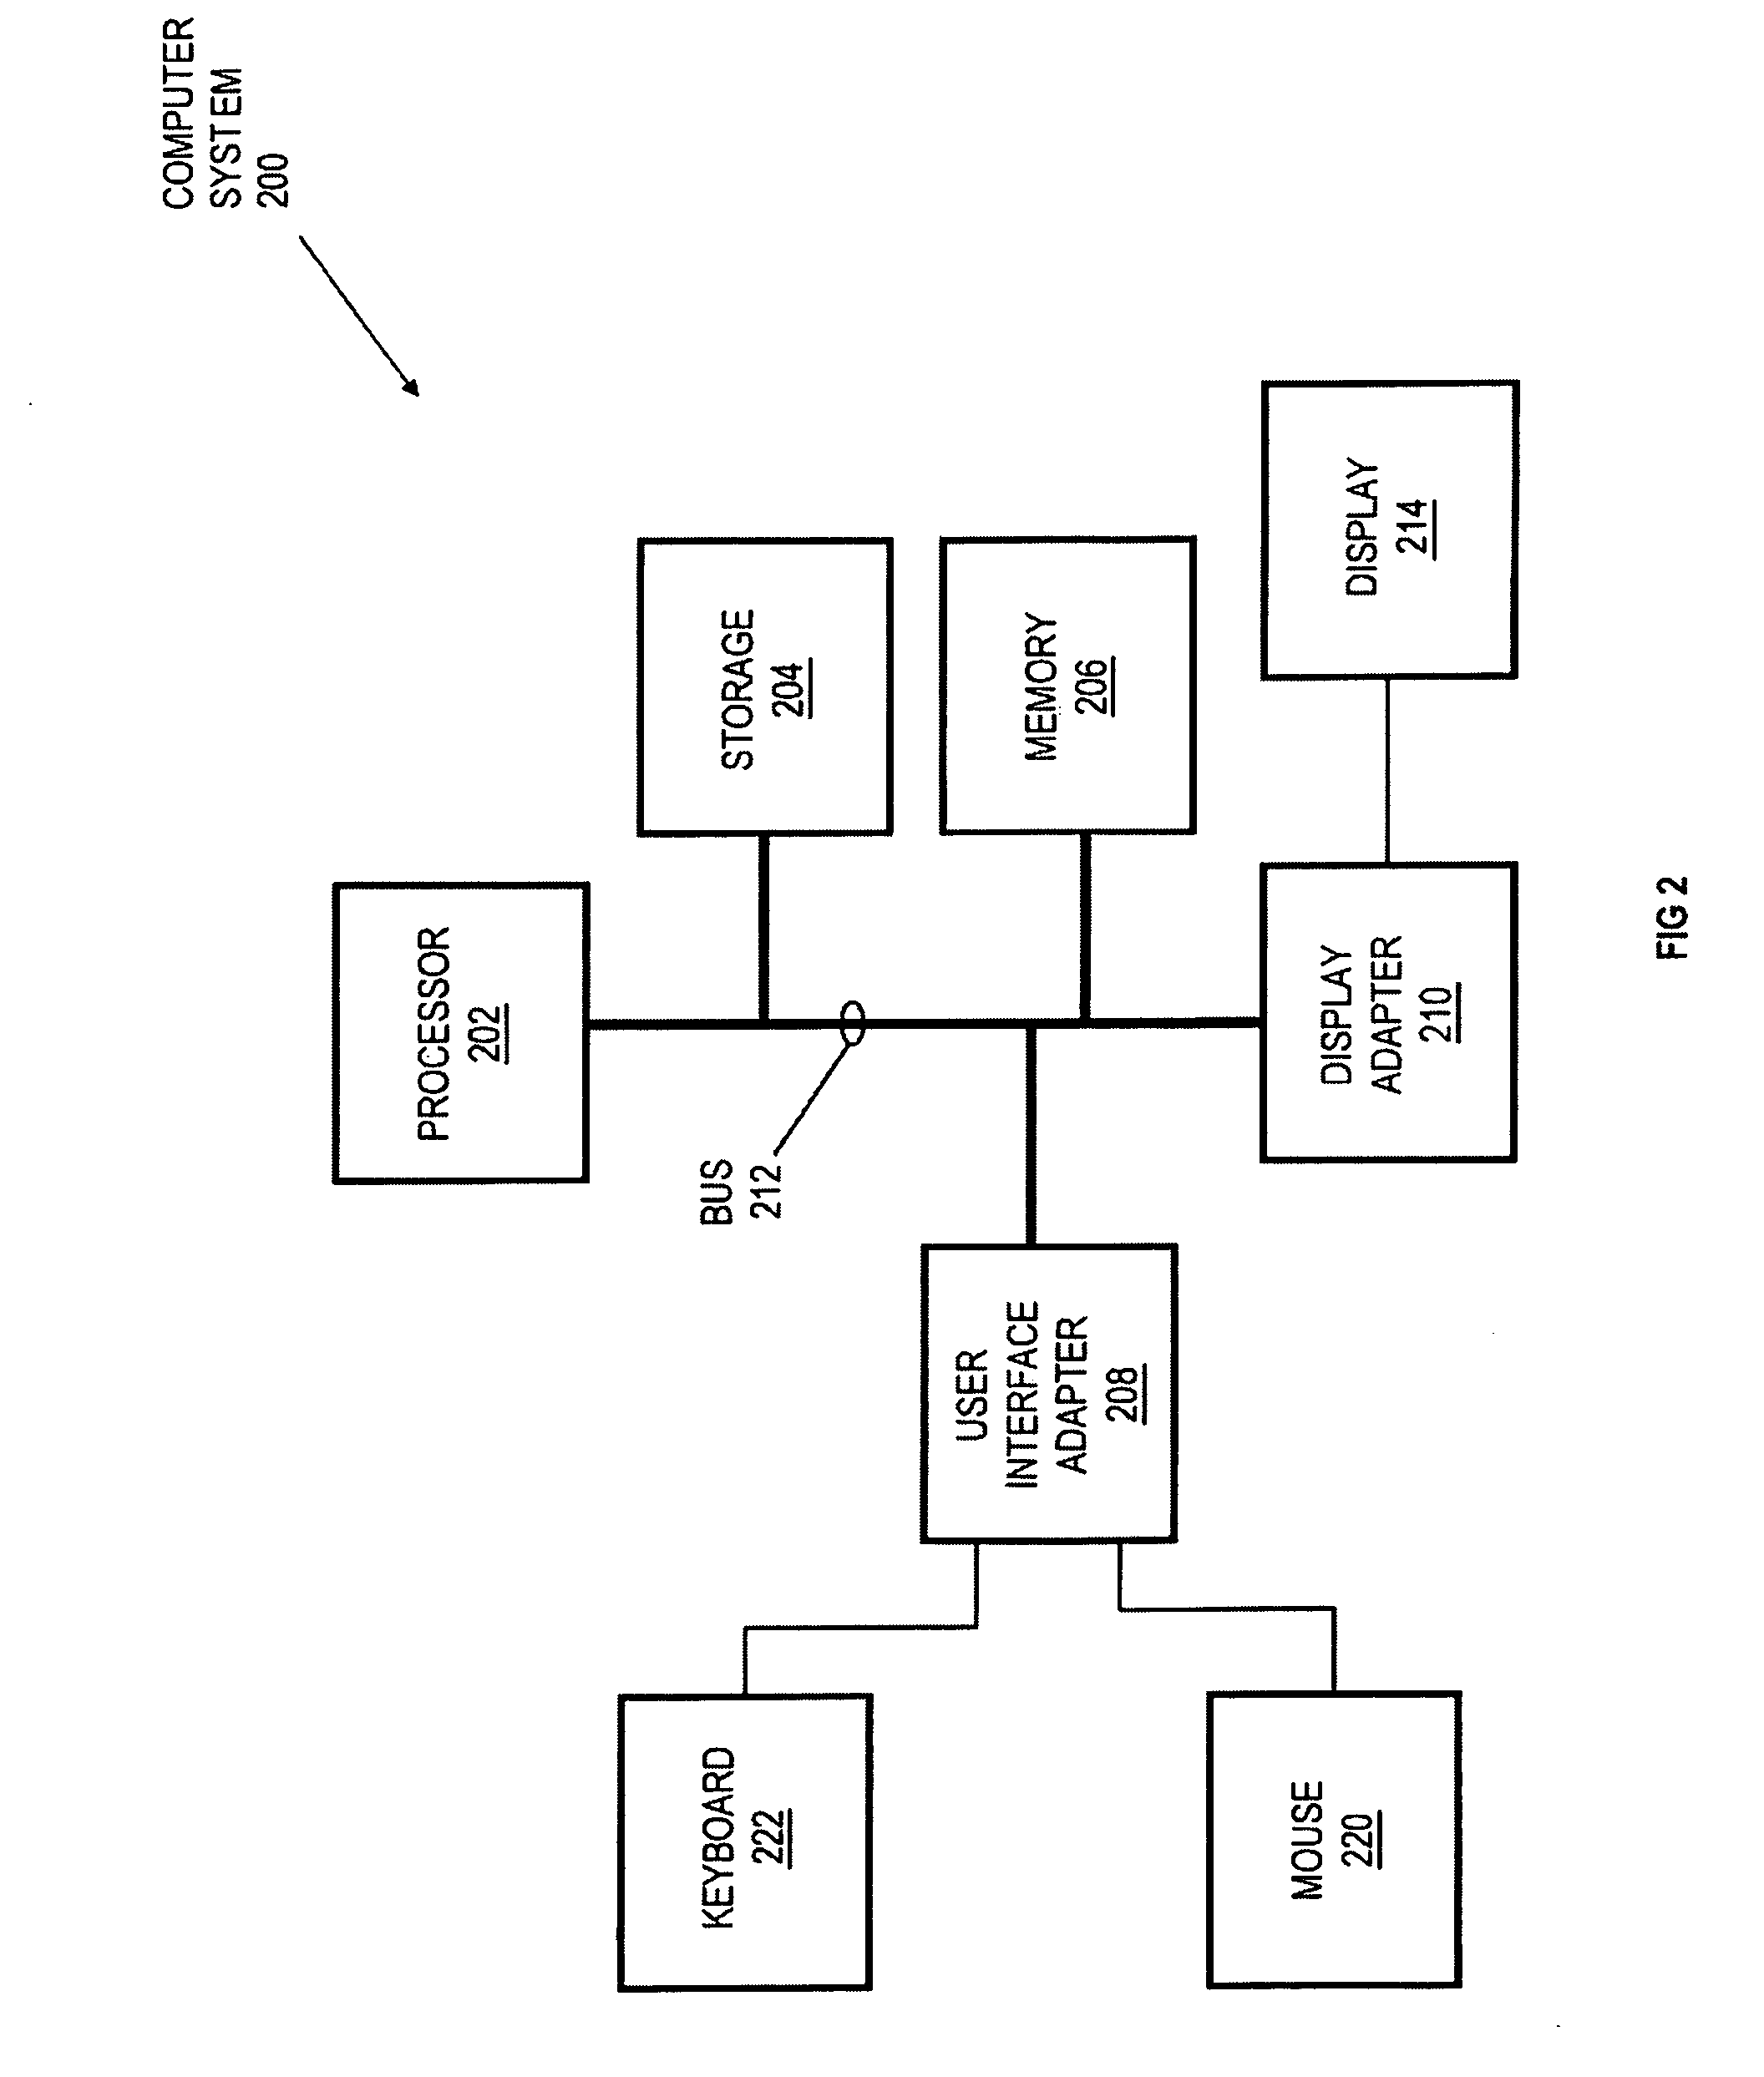 User-Browser Interaction Analysis Authentication System